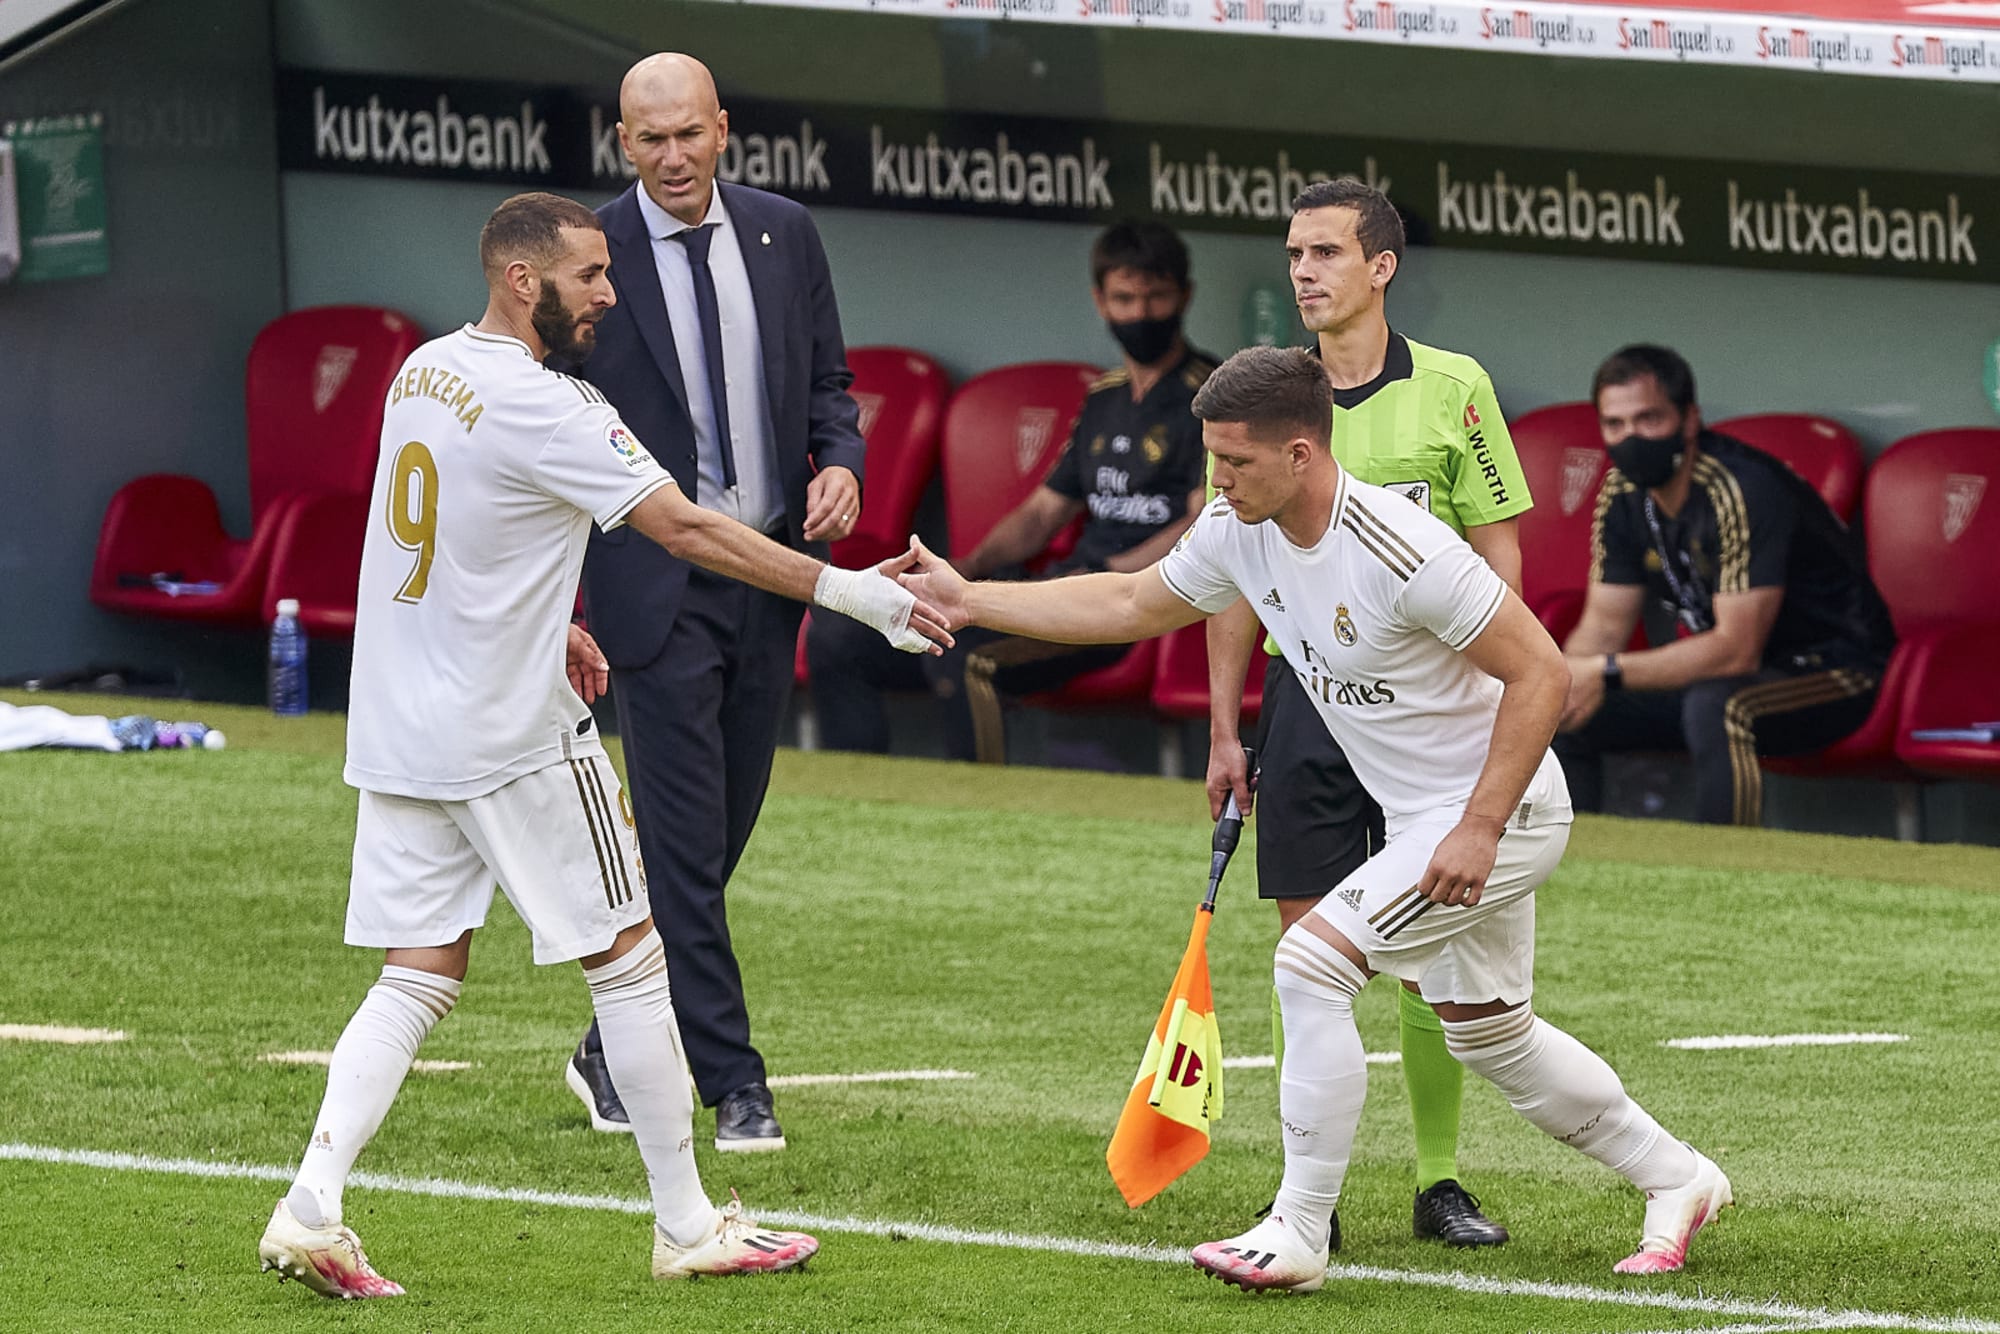 Real Transfers: There may be only one option for Luka Jovic